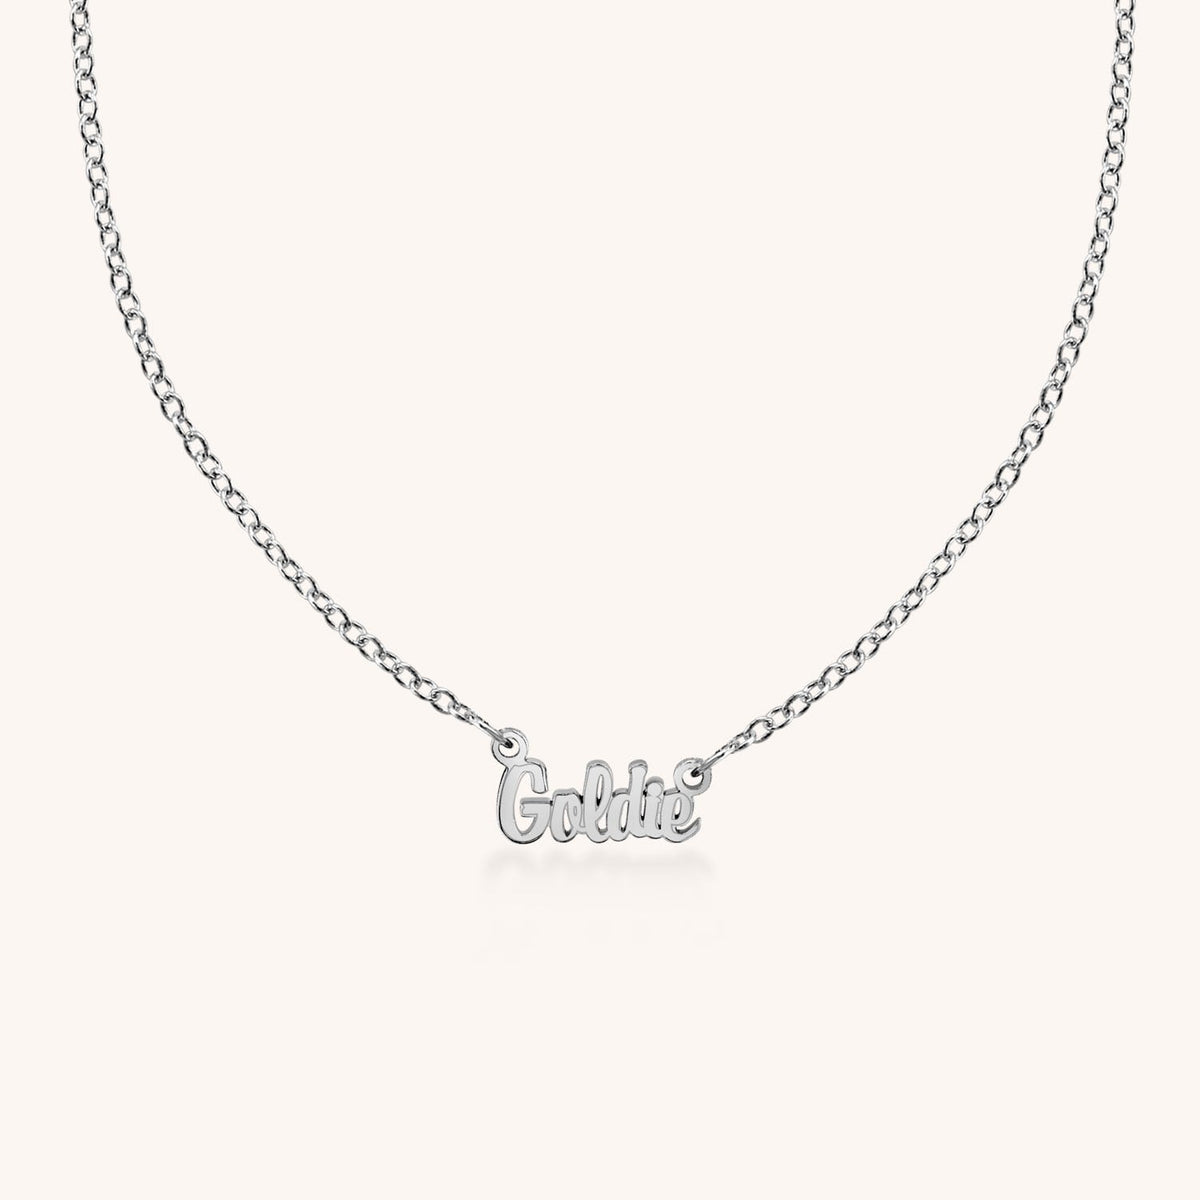 14k Gold Goldie Nameplate Necklace